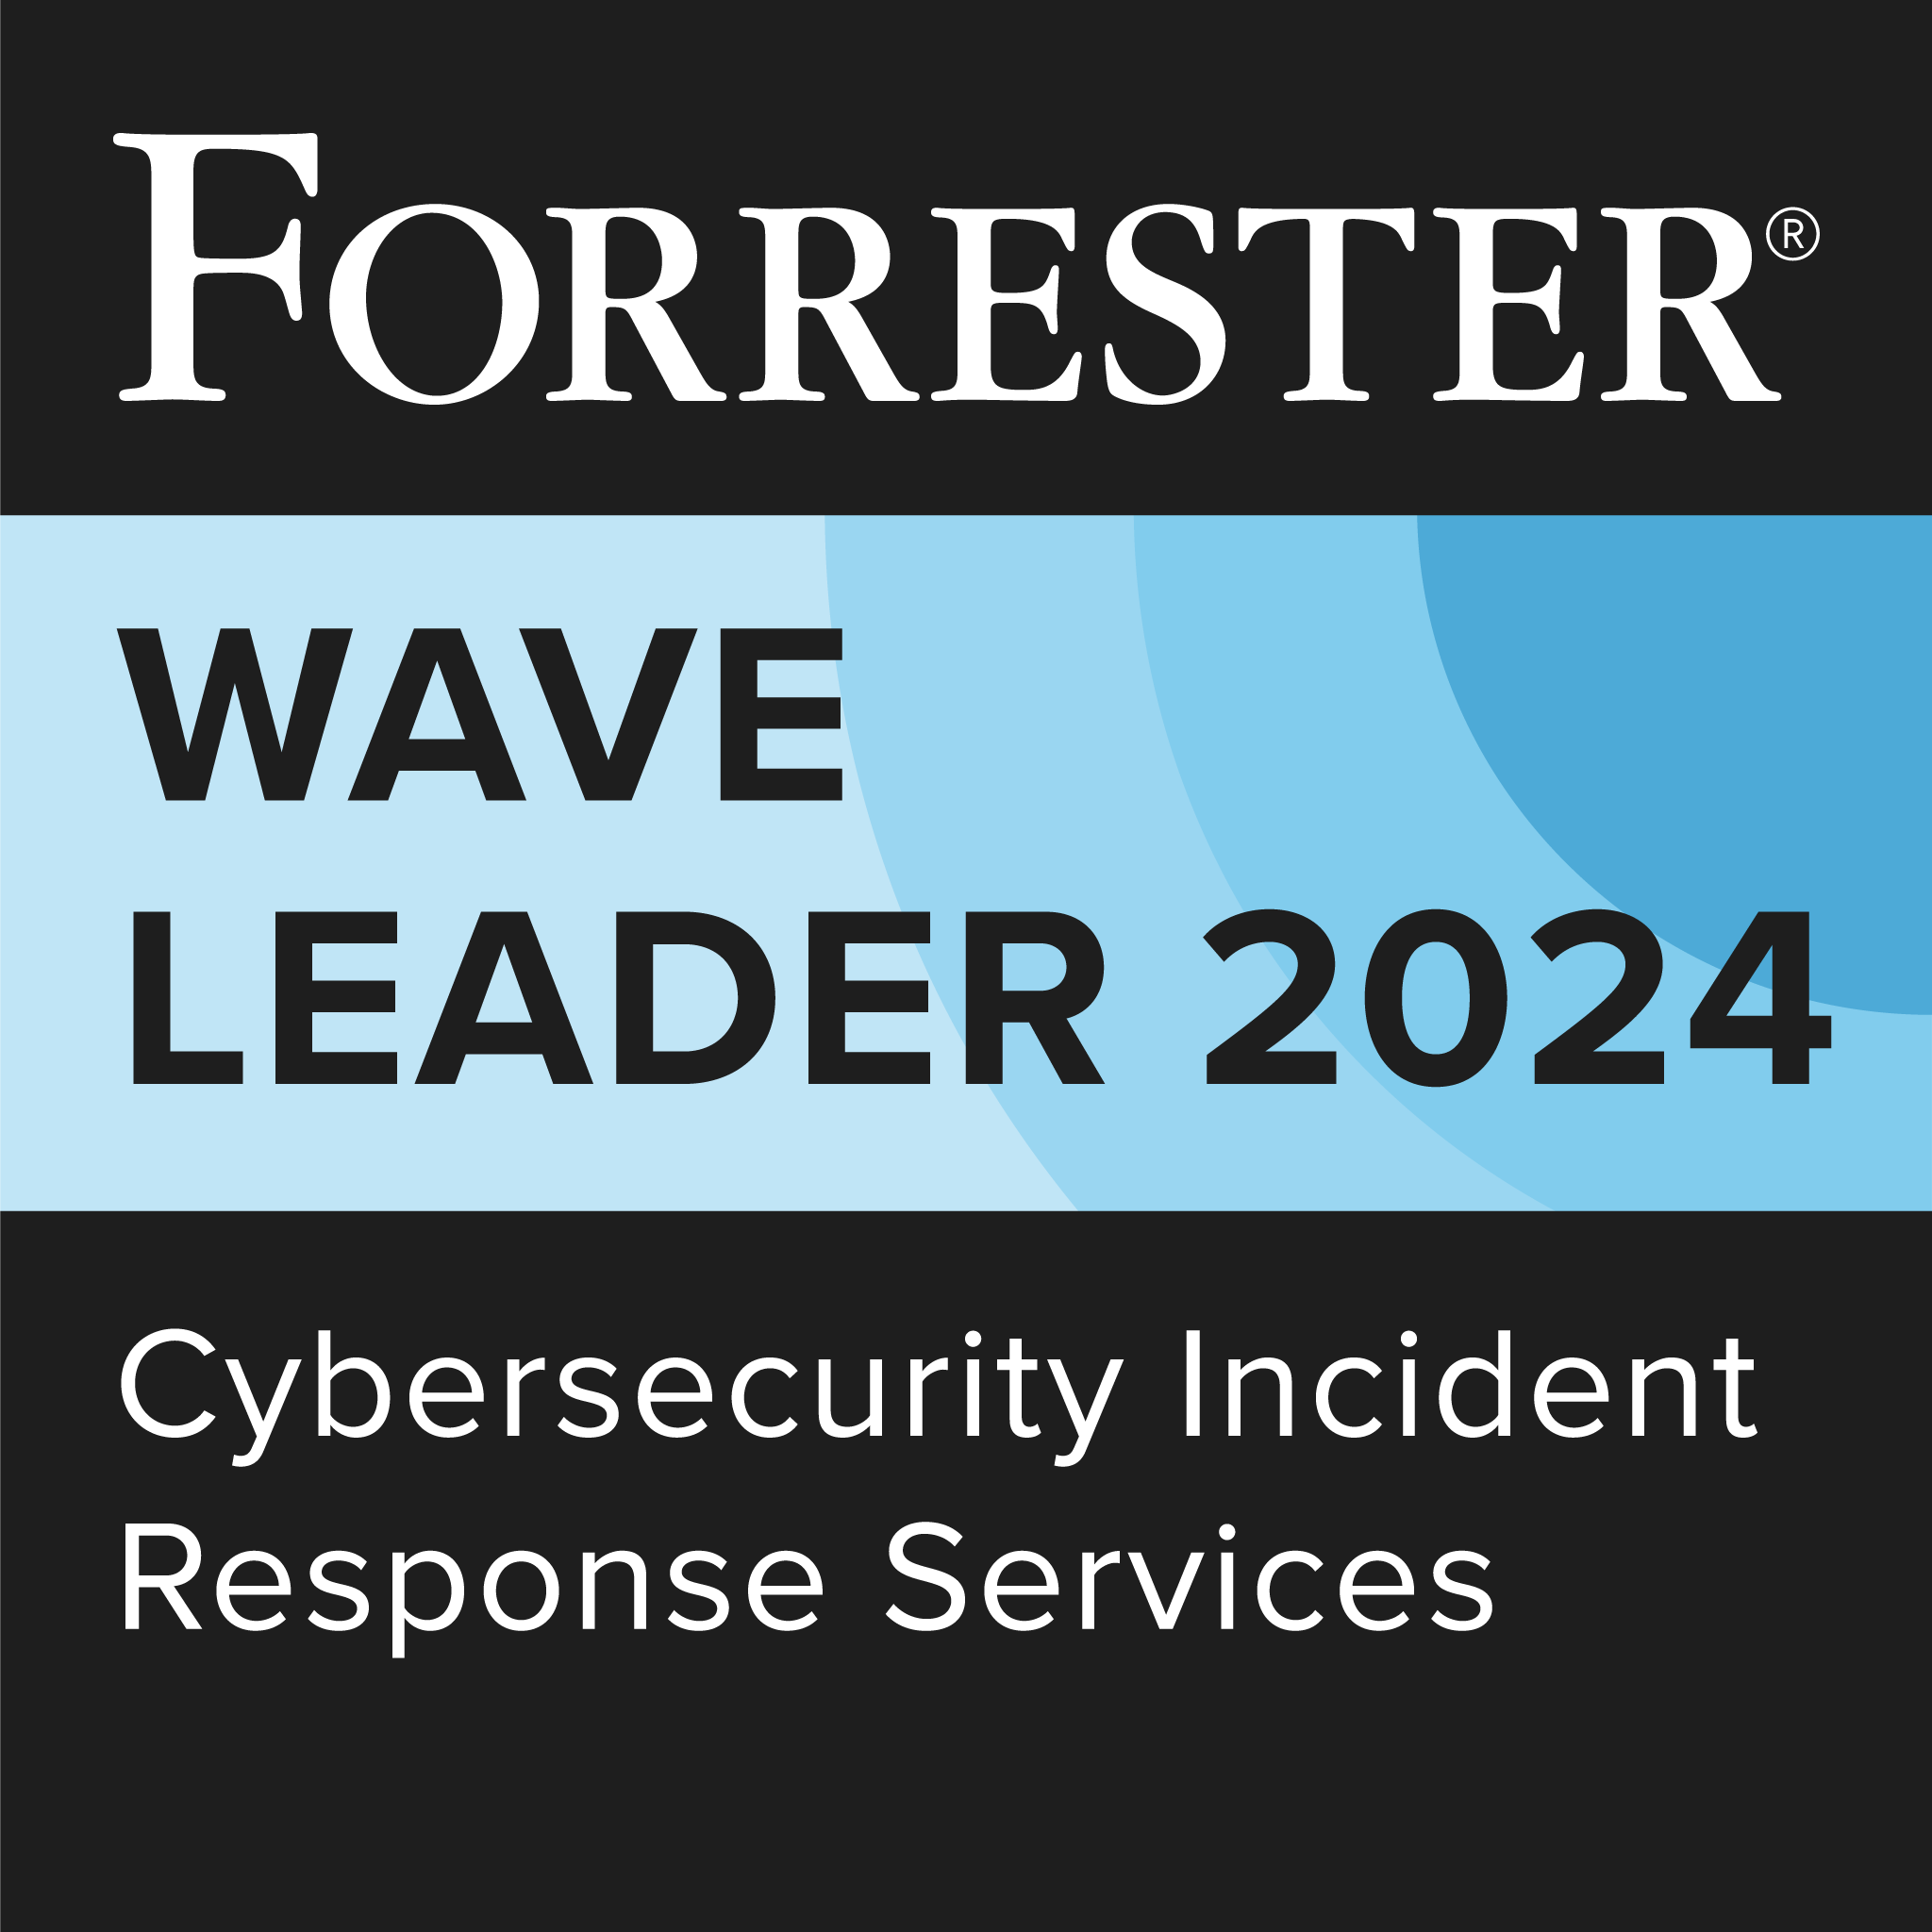 Forrester Wave Leader 2024, cybersecurity incident response services